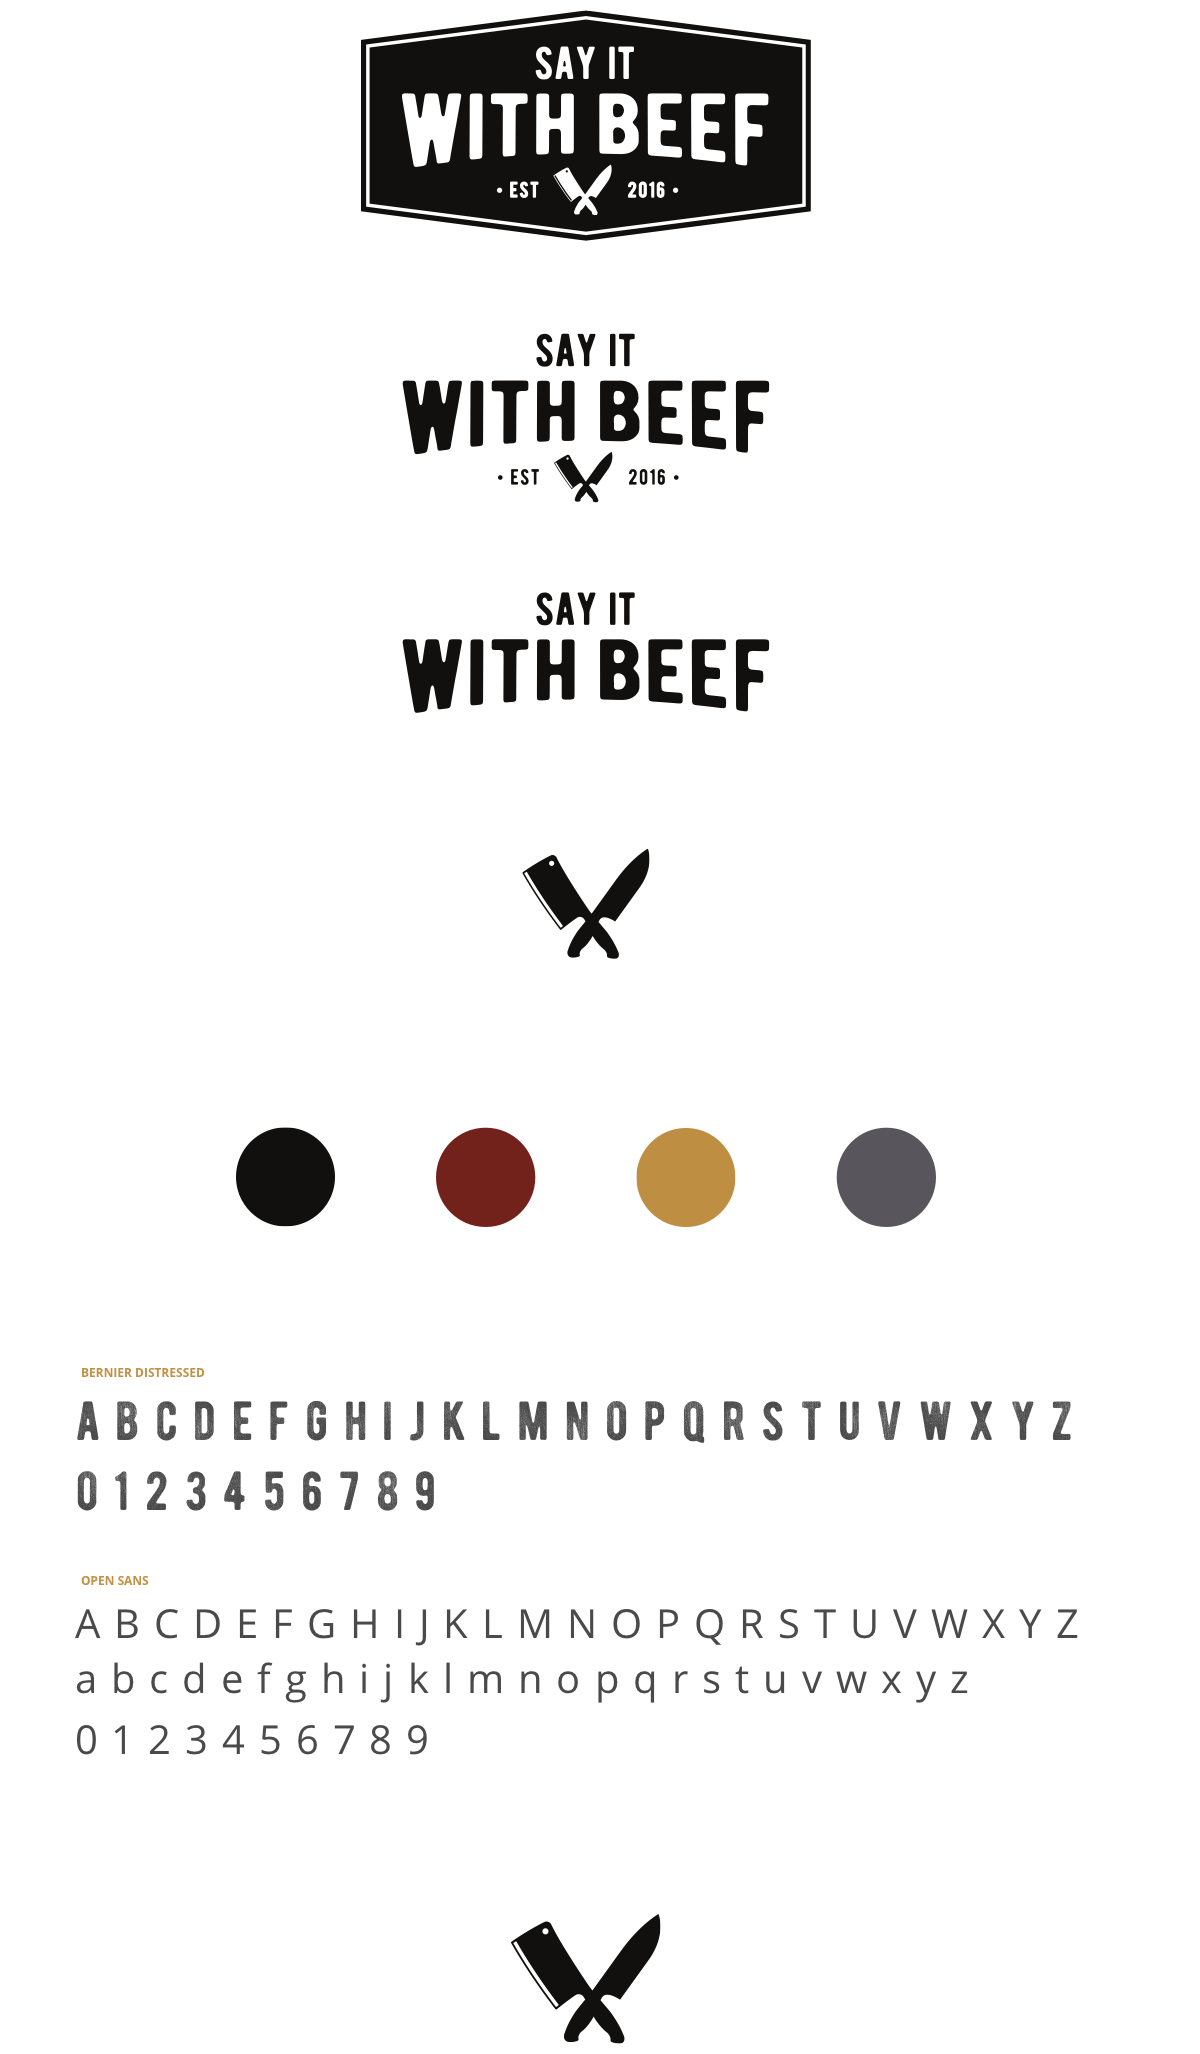 say it with beef logos and branding elements